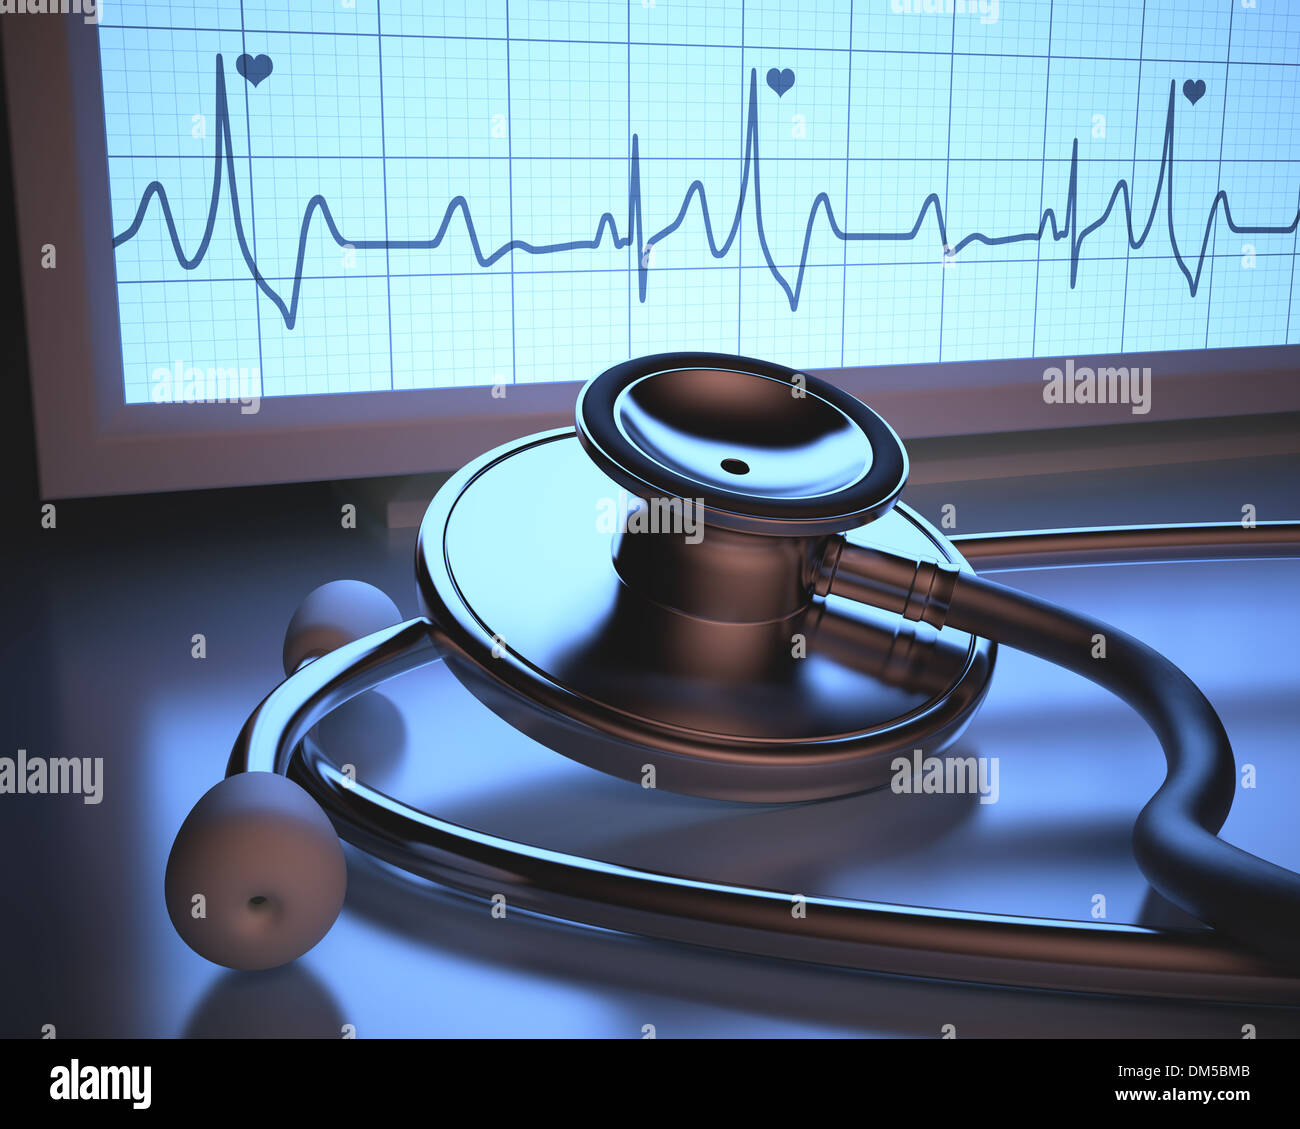 Stethoscope in front of the heartbeat monitor. Clipping path included. Stock Photo